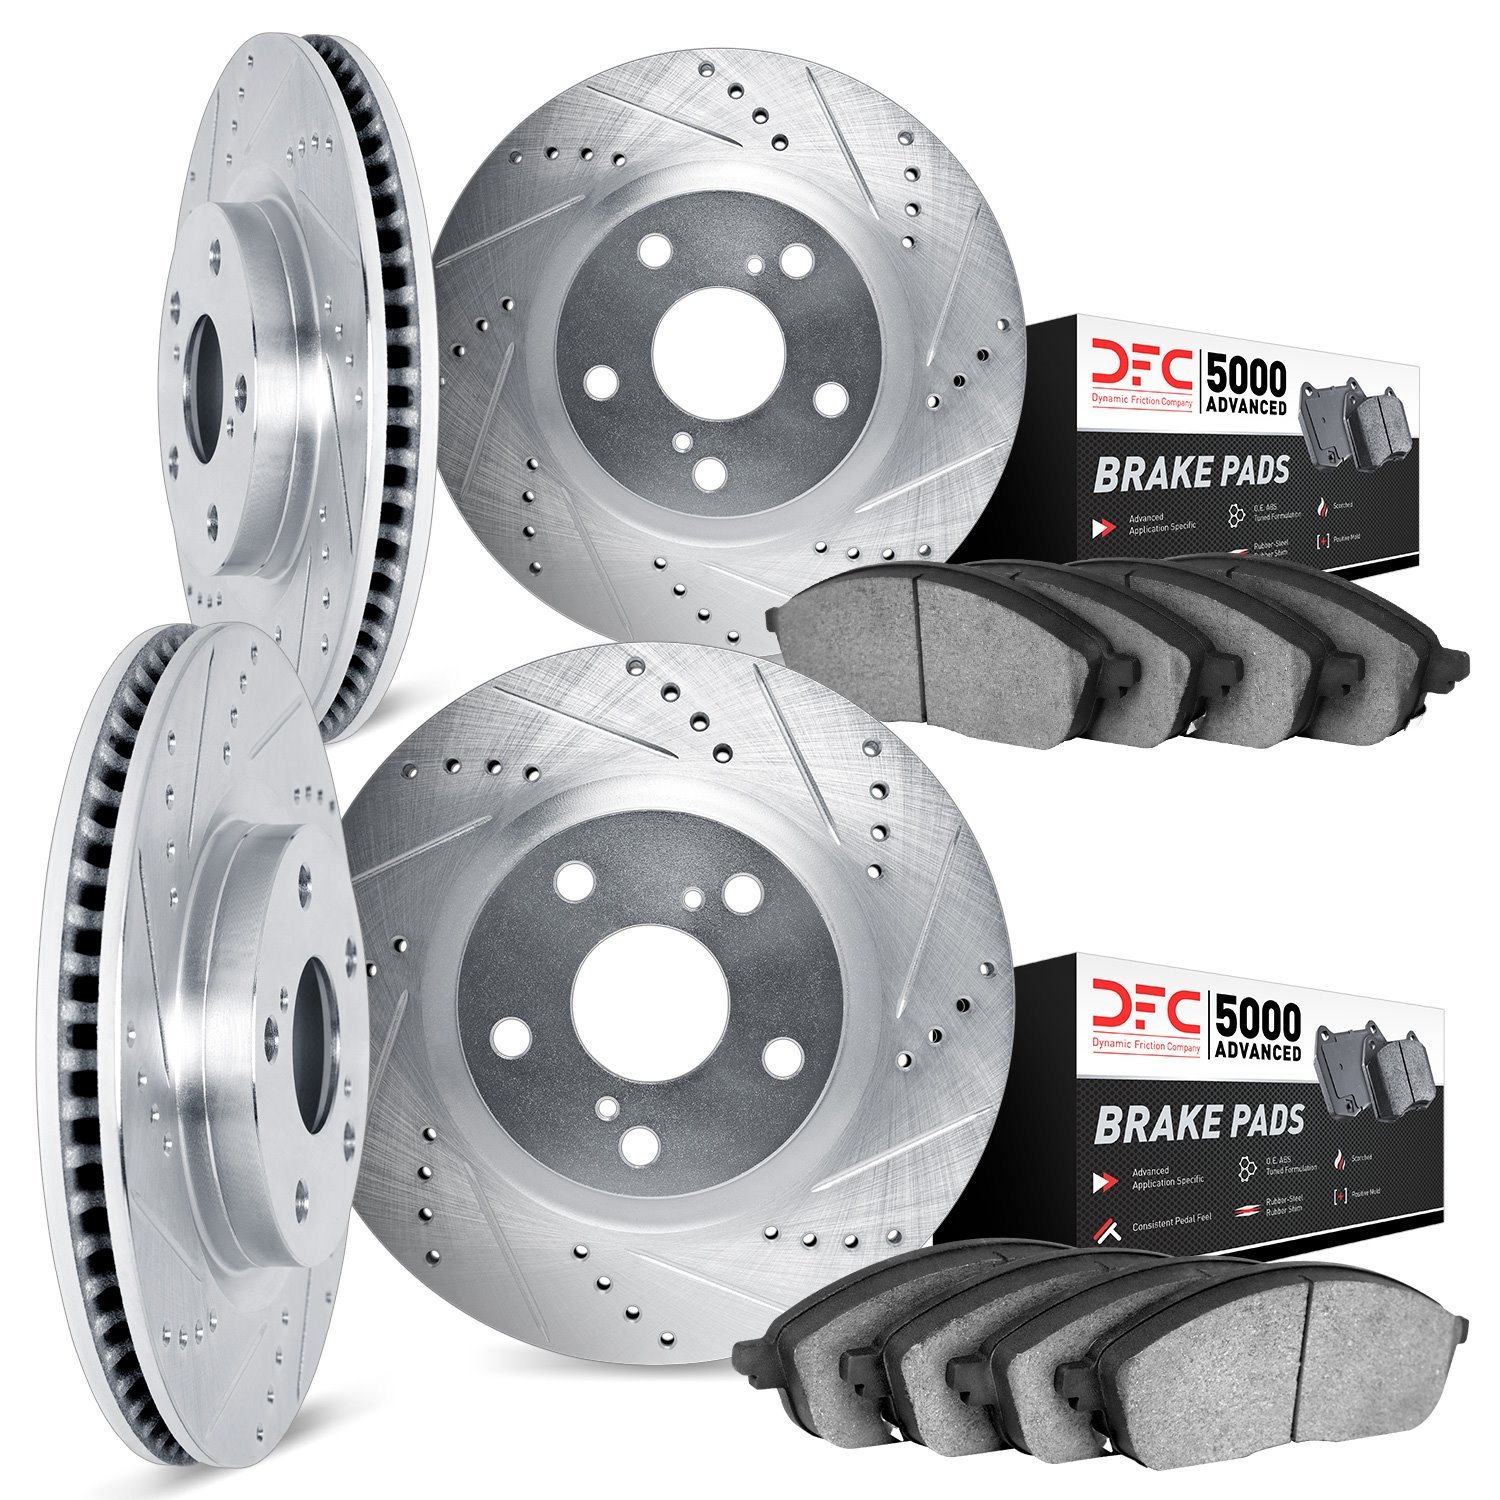 7504-63004 Drilled/Slotted Brake Rotors w/5000 Advanced Brake Pads Kit [Silver], 2018-2019 Mercedes-Benz, Position: Front and Re